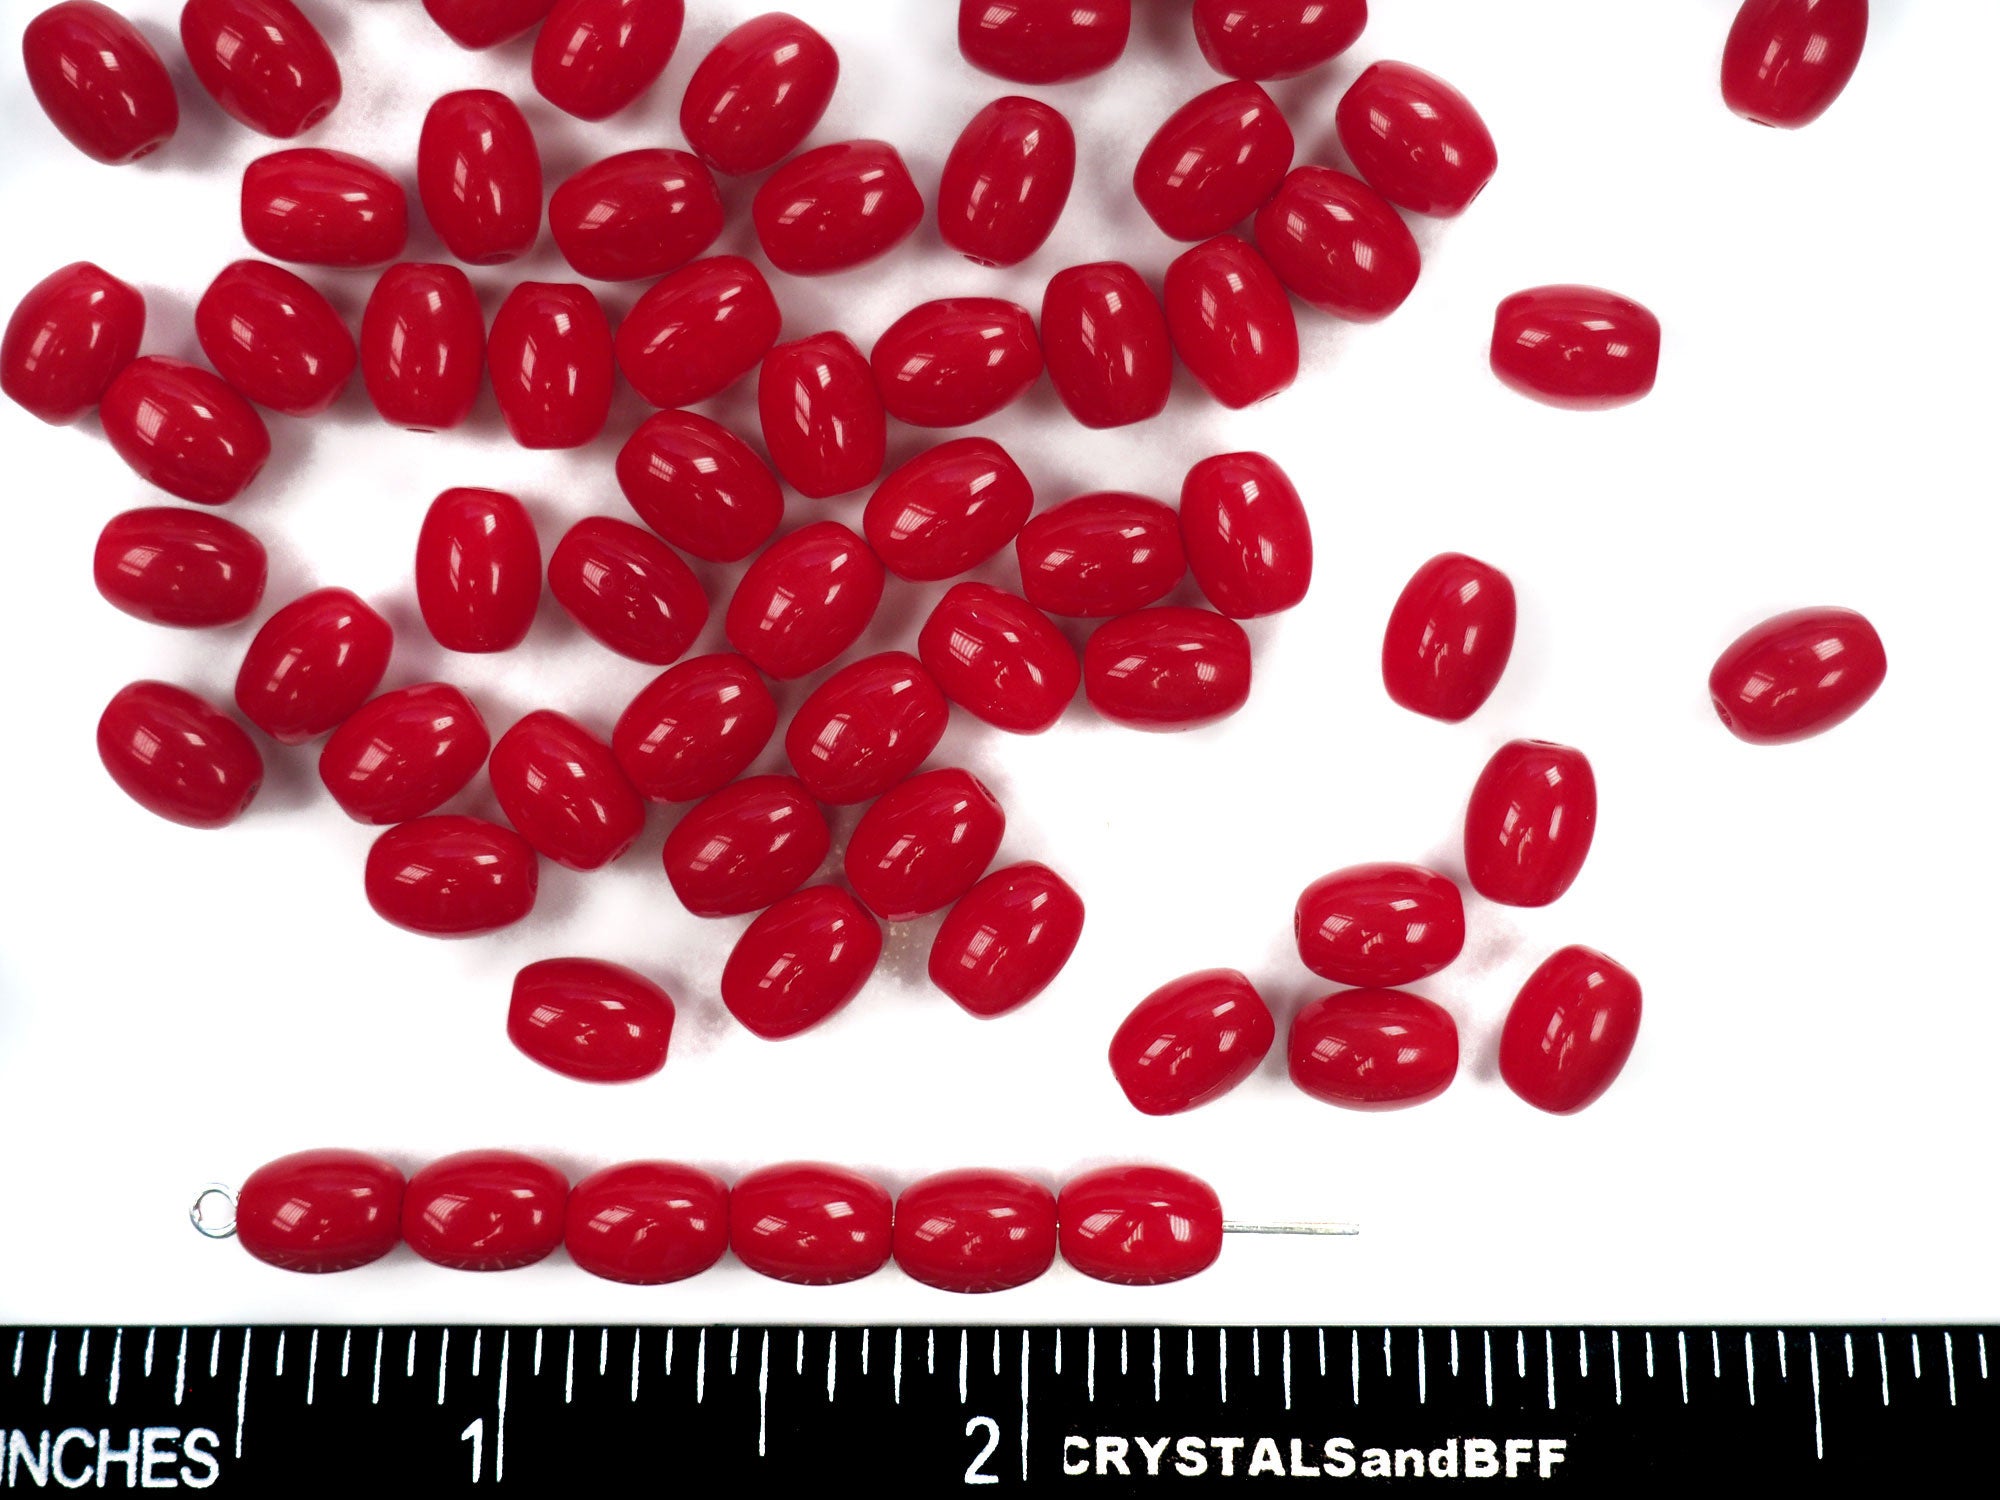 Czech Glass Druk Beads in size 8x6mm, Smooth, Red Opaque, 30pcs, P894